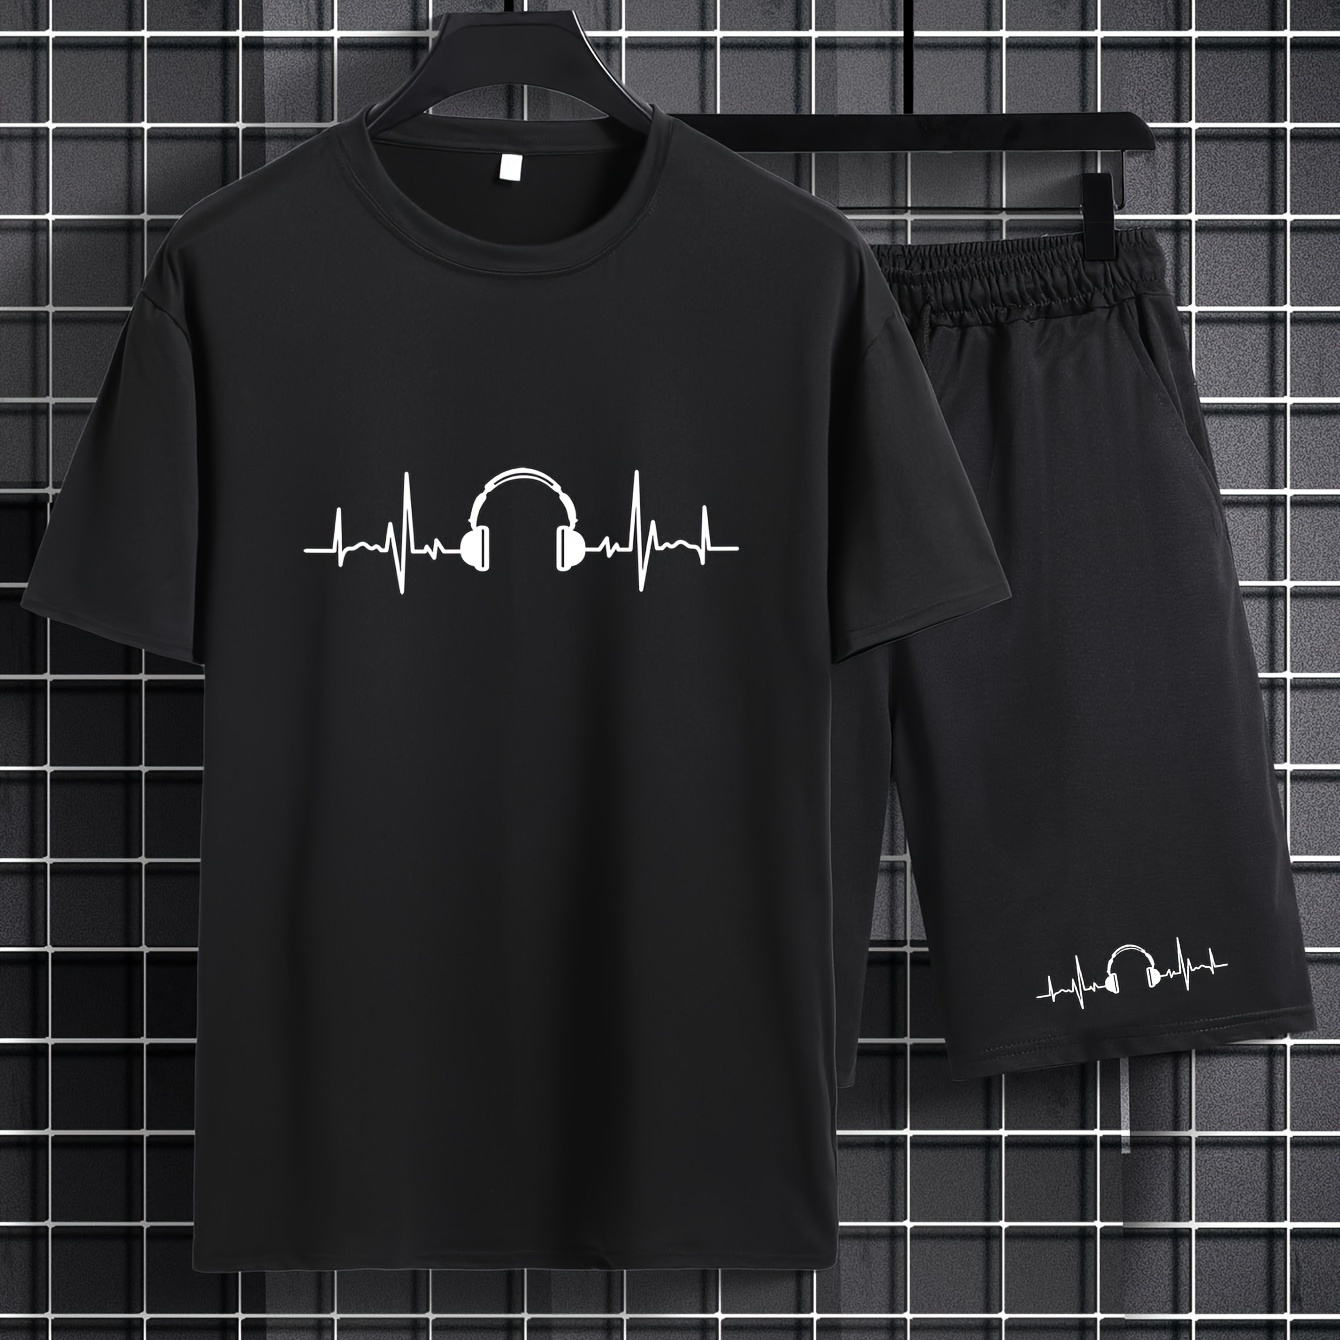 

Headphone Print, Mens 2 Piece Outfits, Comfy Short Sleeve T-shirt And Casual Drawstring Shorts Set For Summer, Men's Clothing